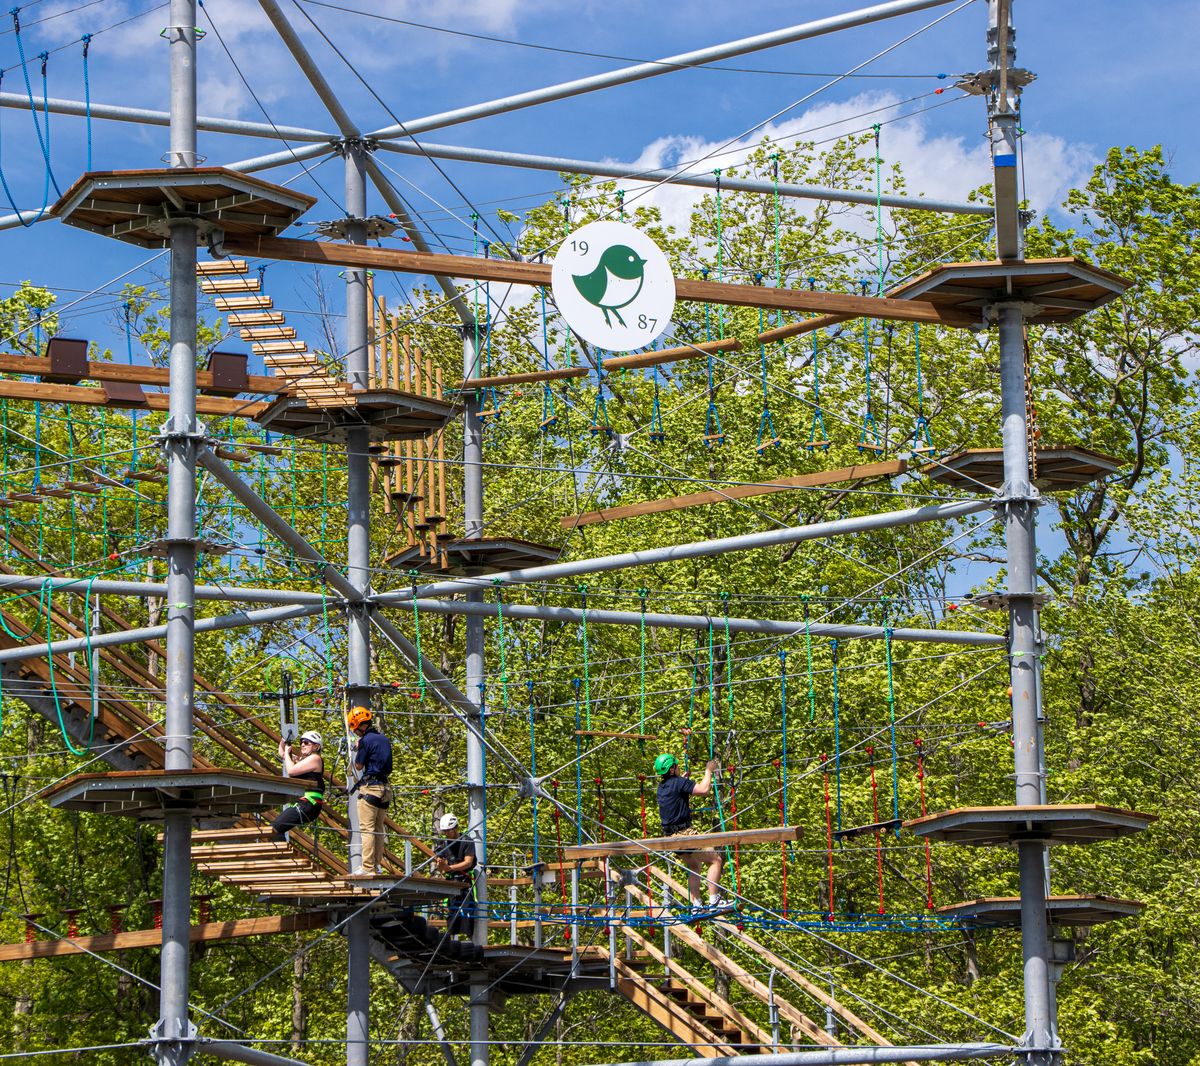 High Ropes Challenge Course at The Peak. Gusts climbing to the top of the course suspended by ropes. 